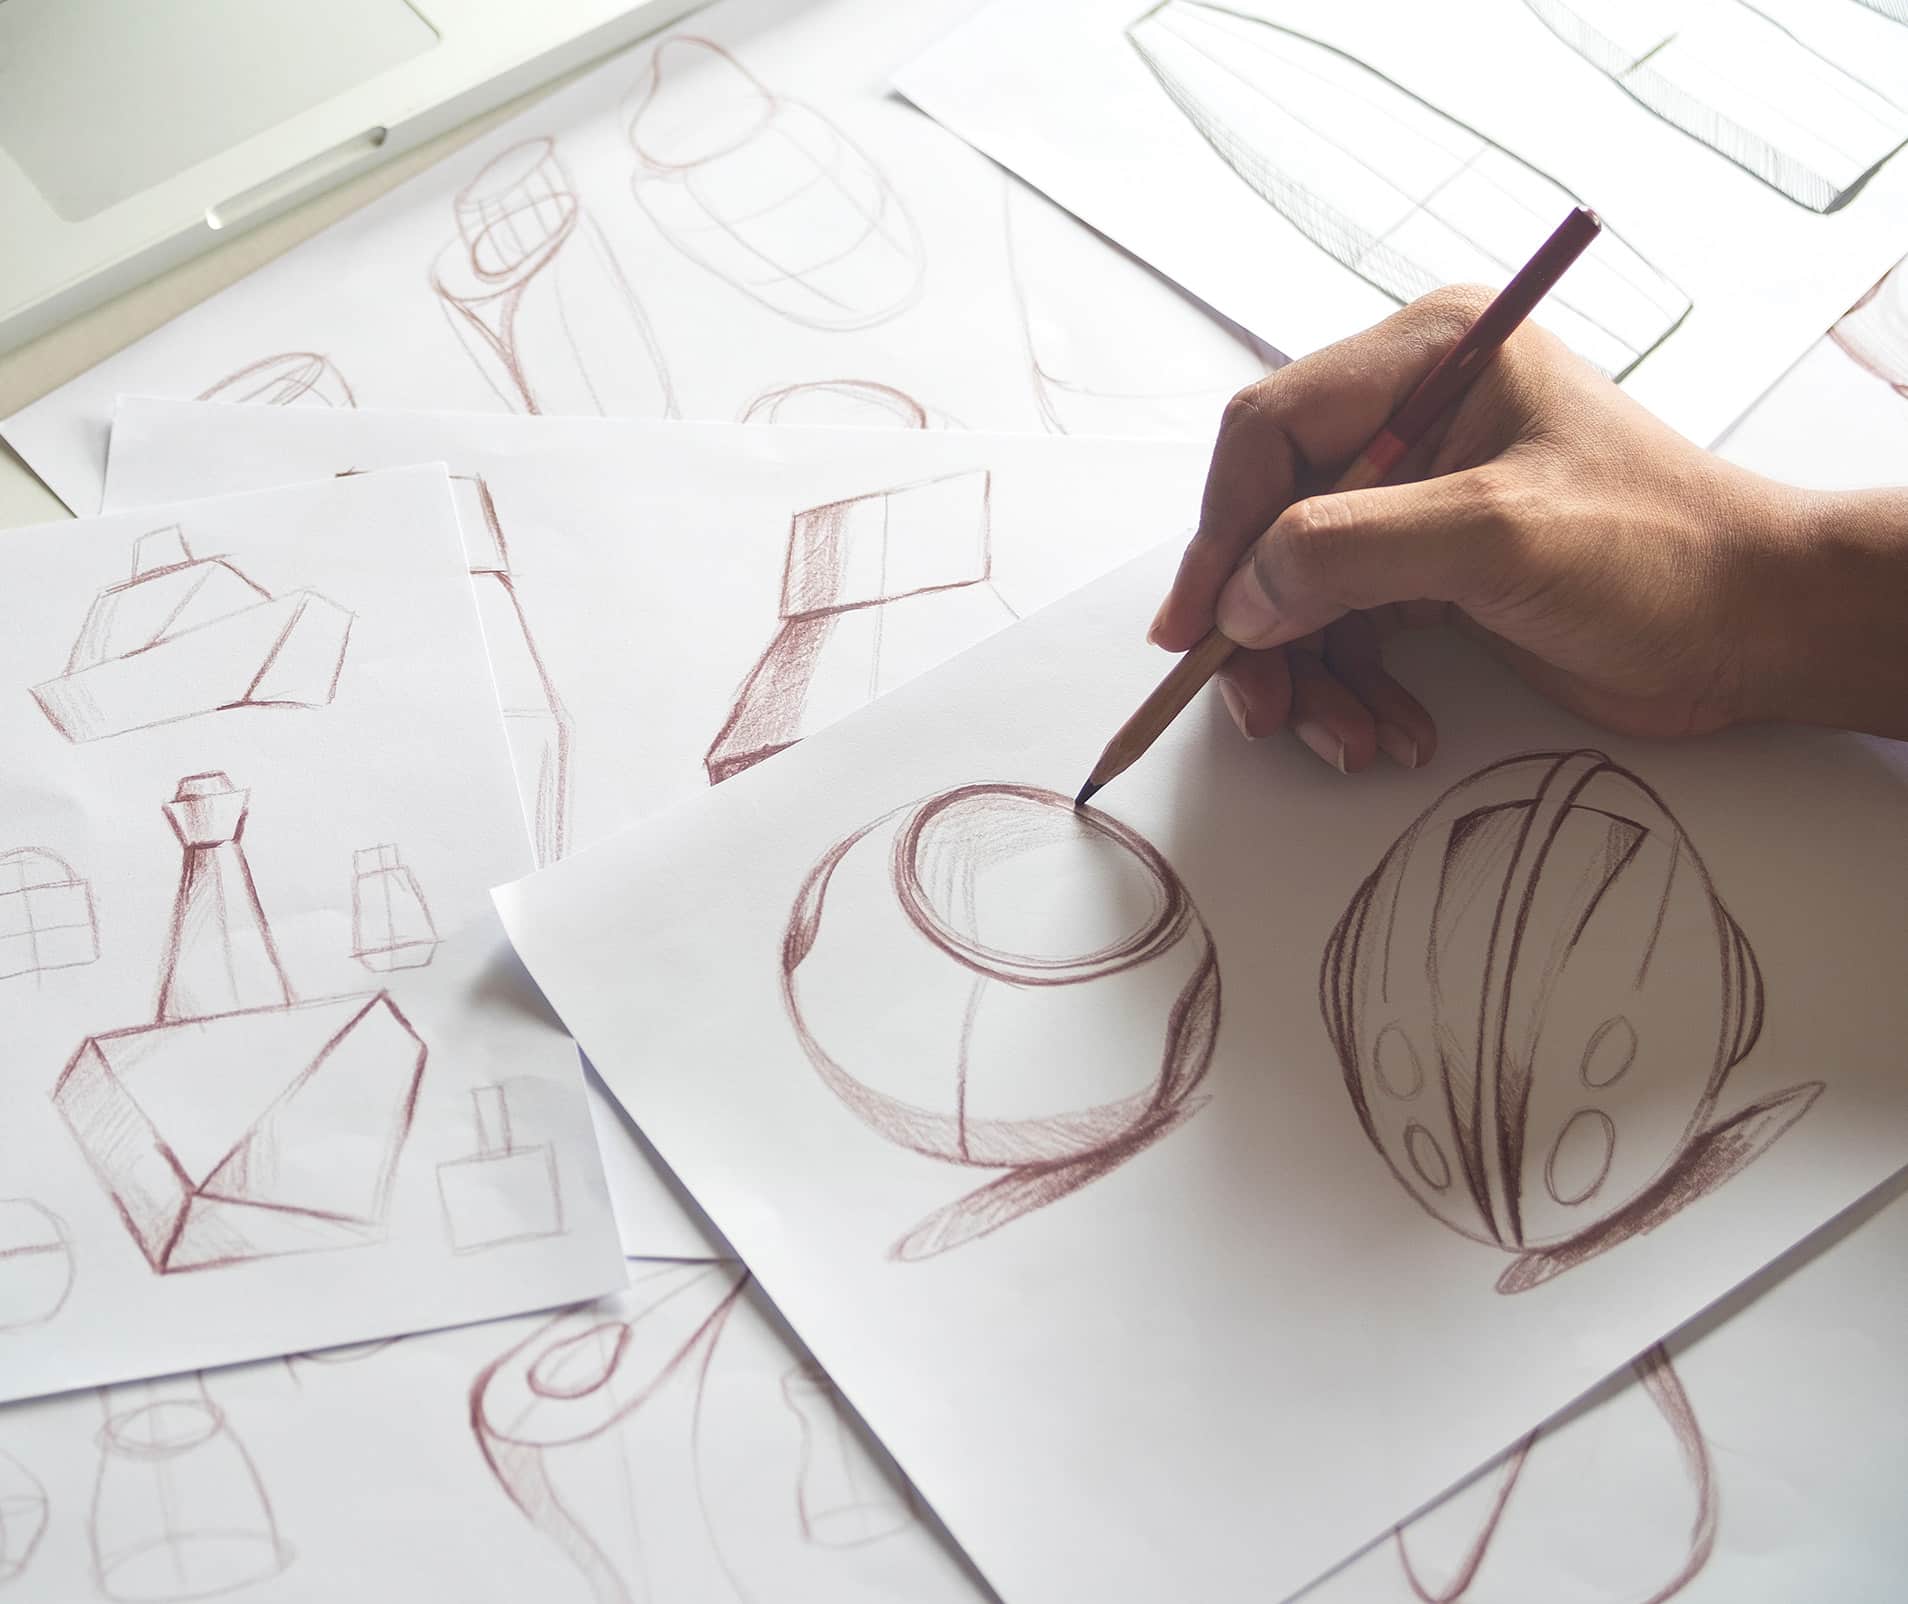 A designer sketches a new product